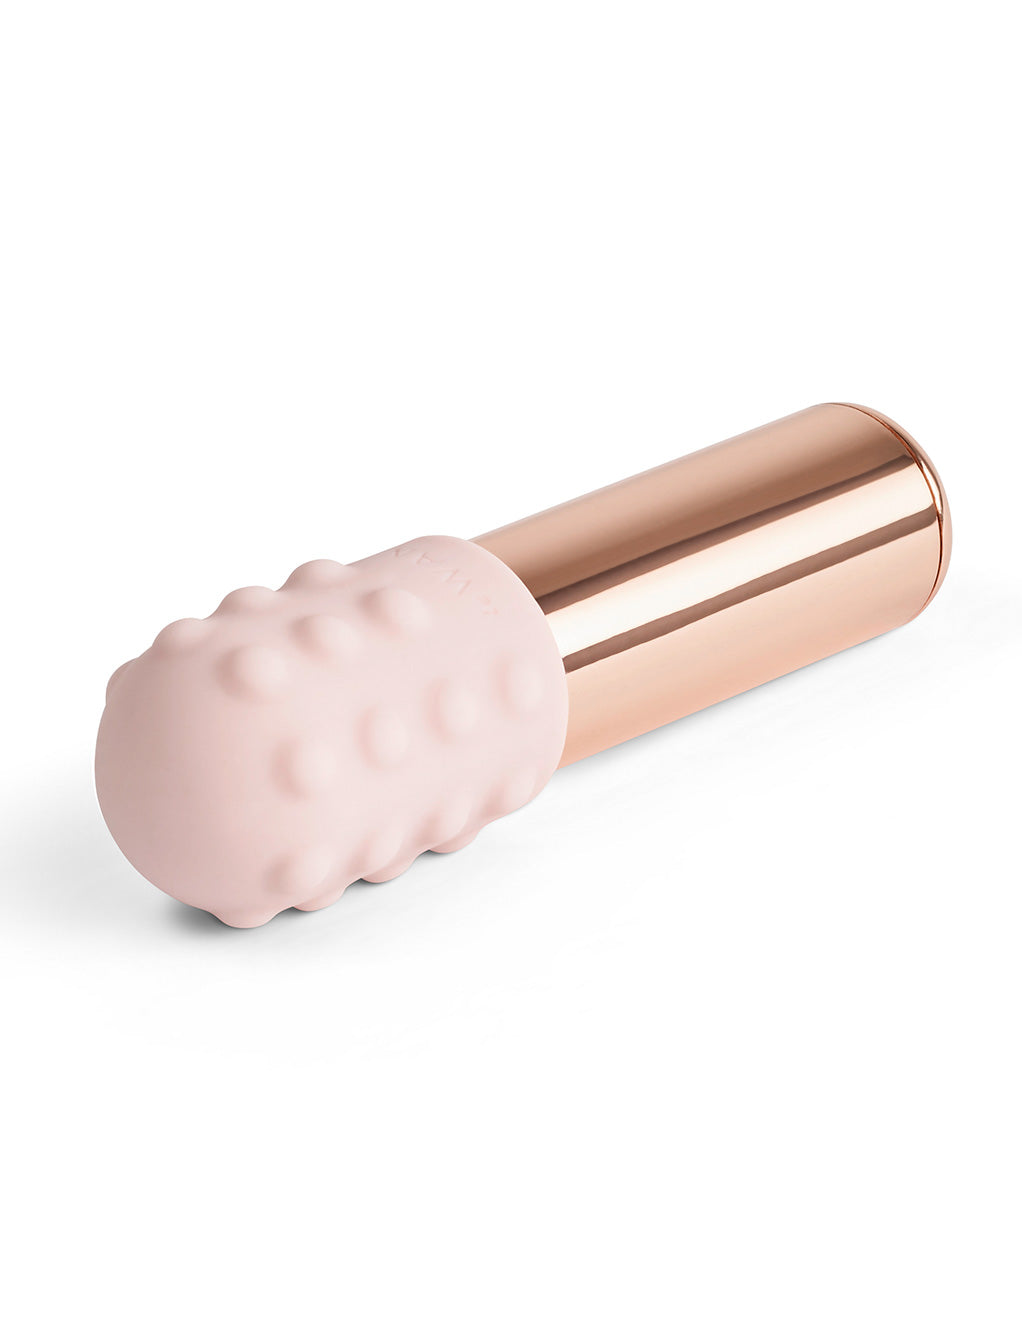 Le Wand Bullet Rechargeable Clitoral Vibrator- Rose Gold- Top